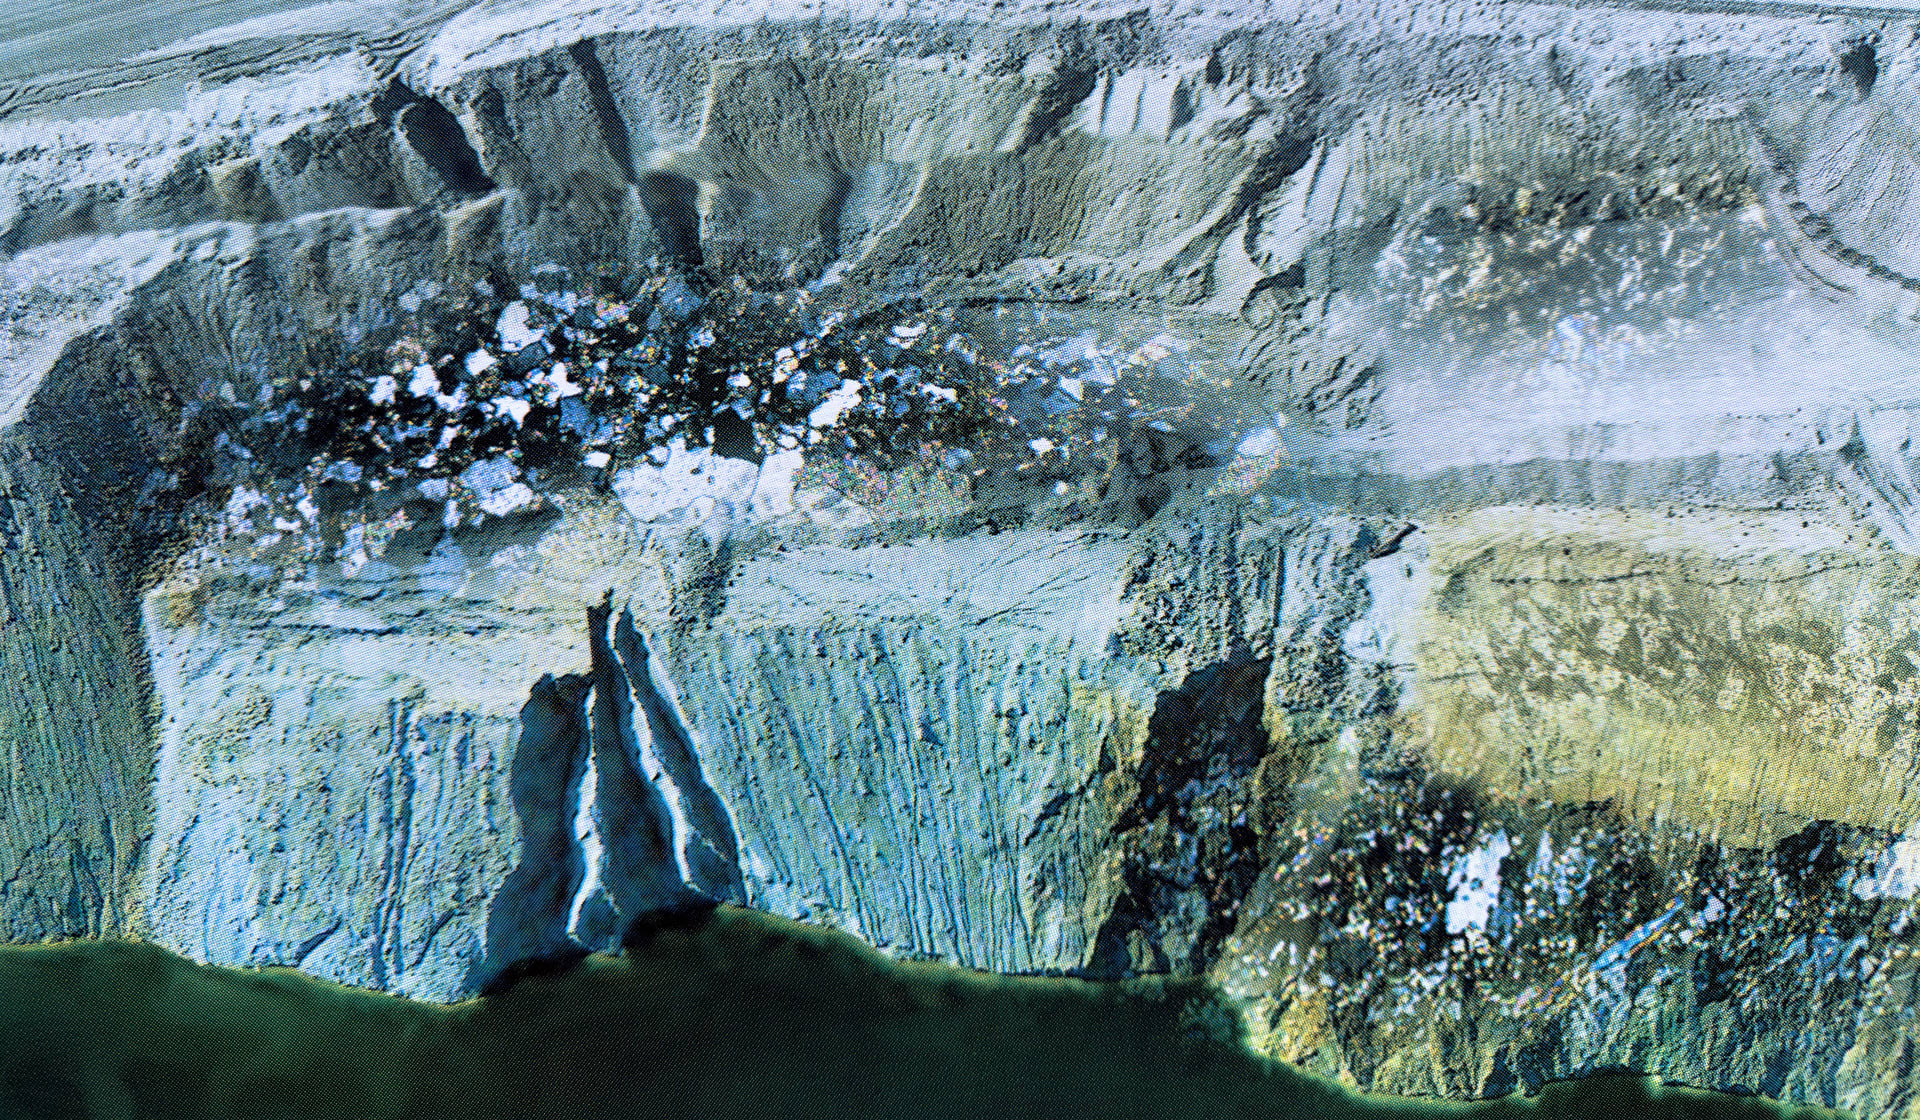 Screen print on paper depicting microscopic and satellite imagery of the landscape at an open pit mine.